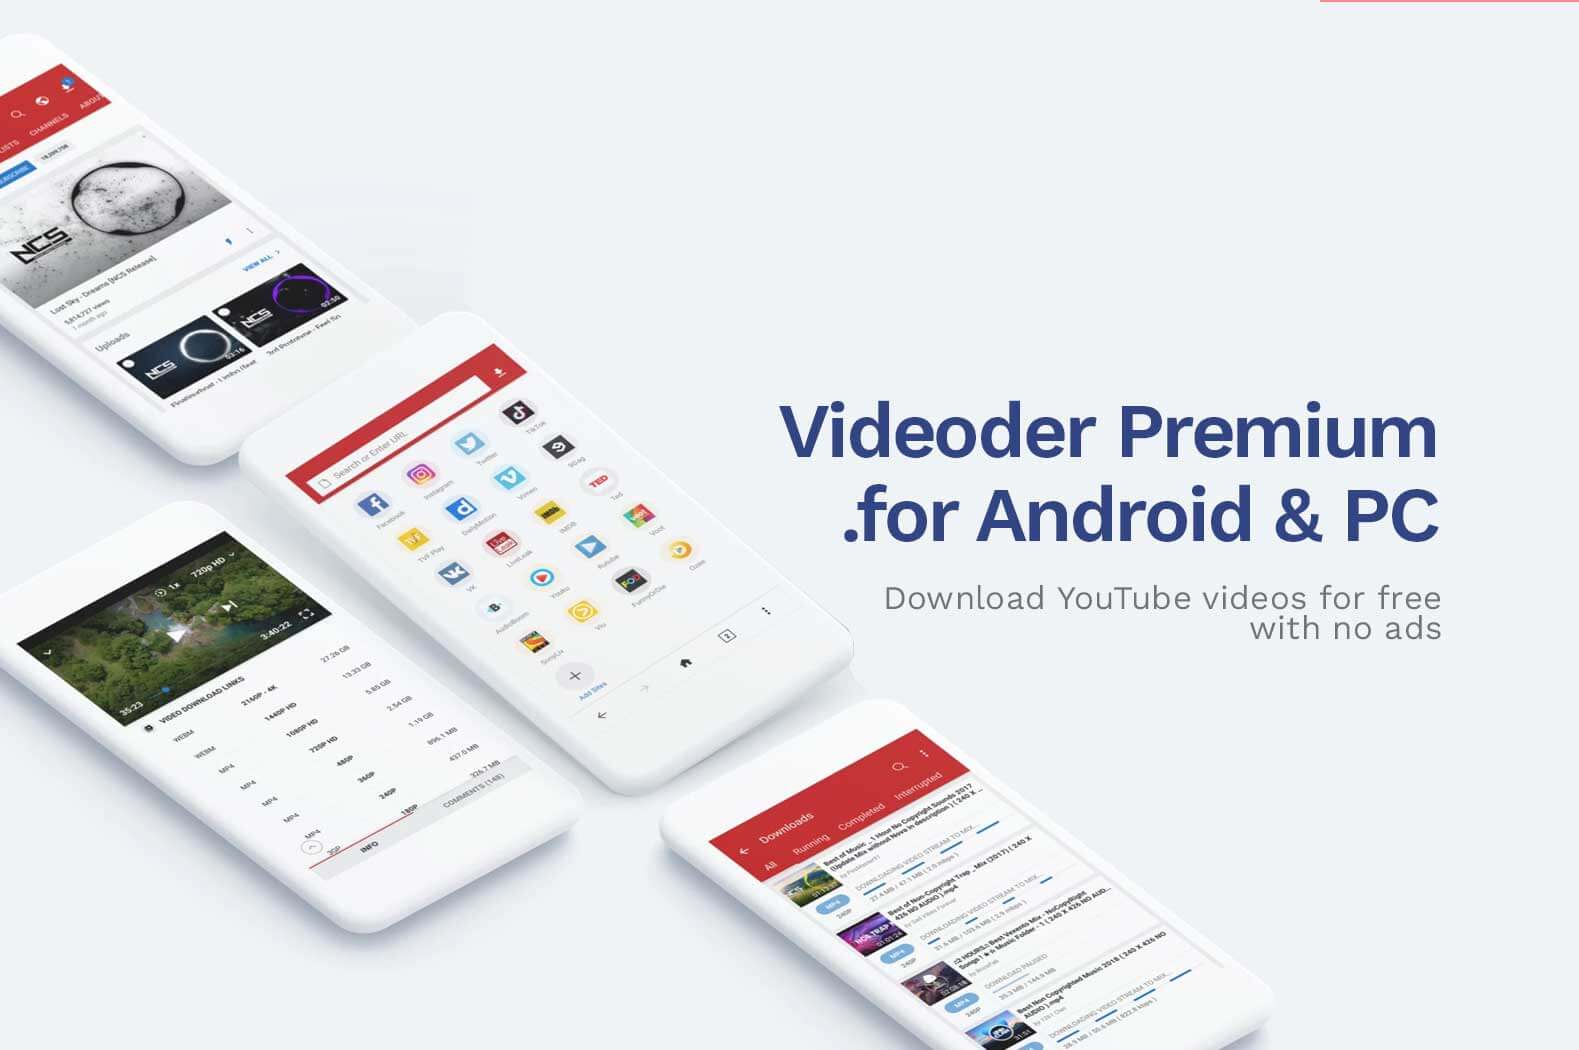 How To Download Videoder Premium APK for Android and PC